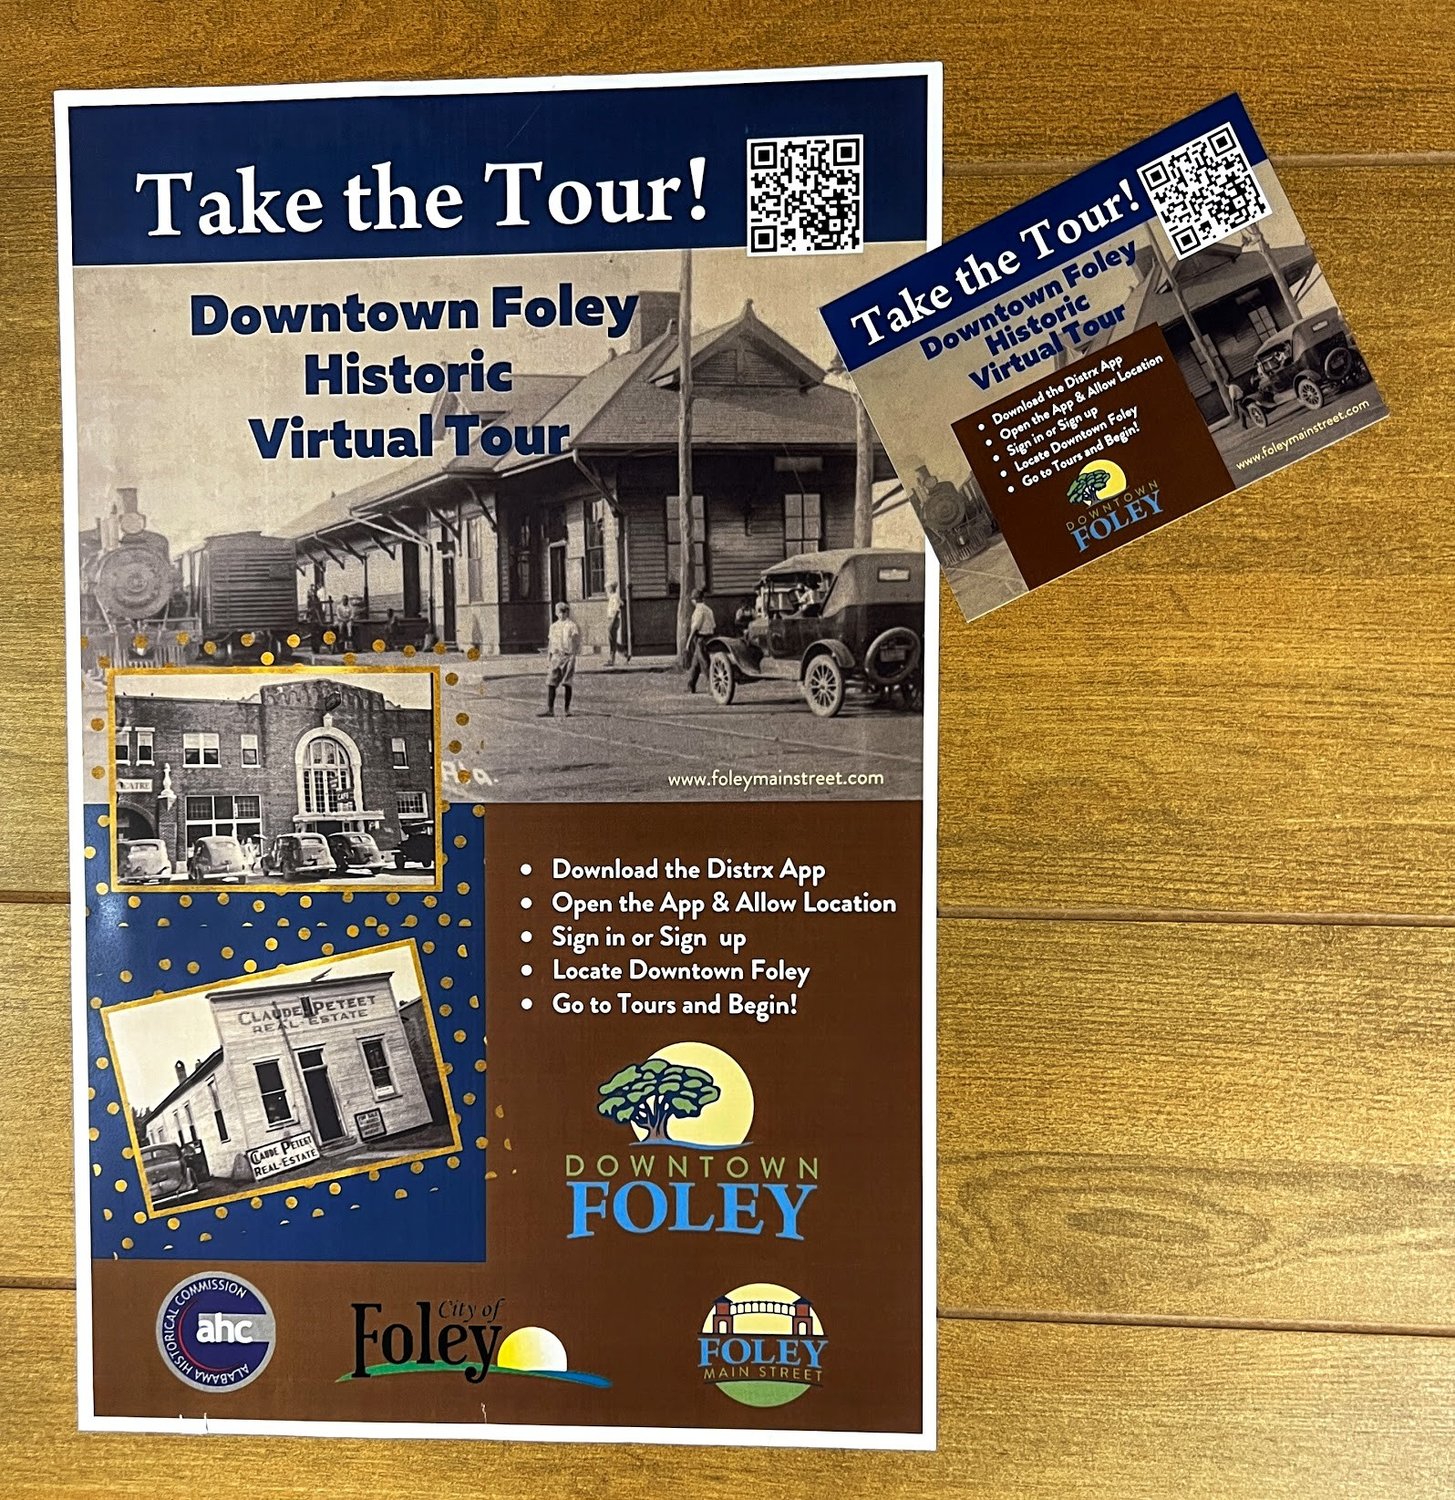 Promotion material for the Historic Tour.